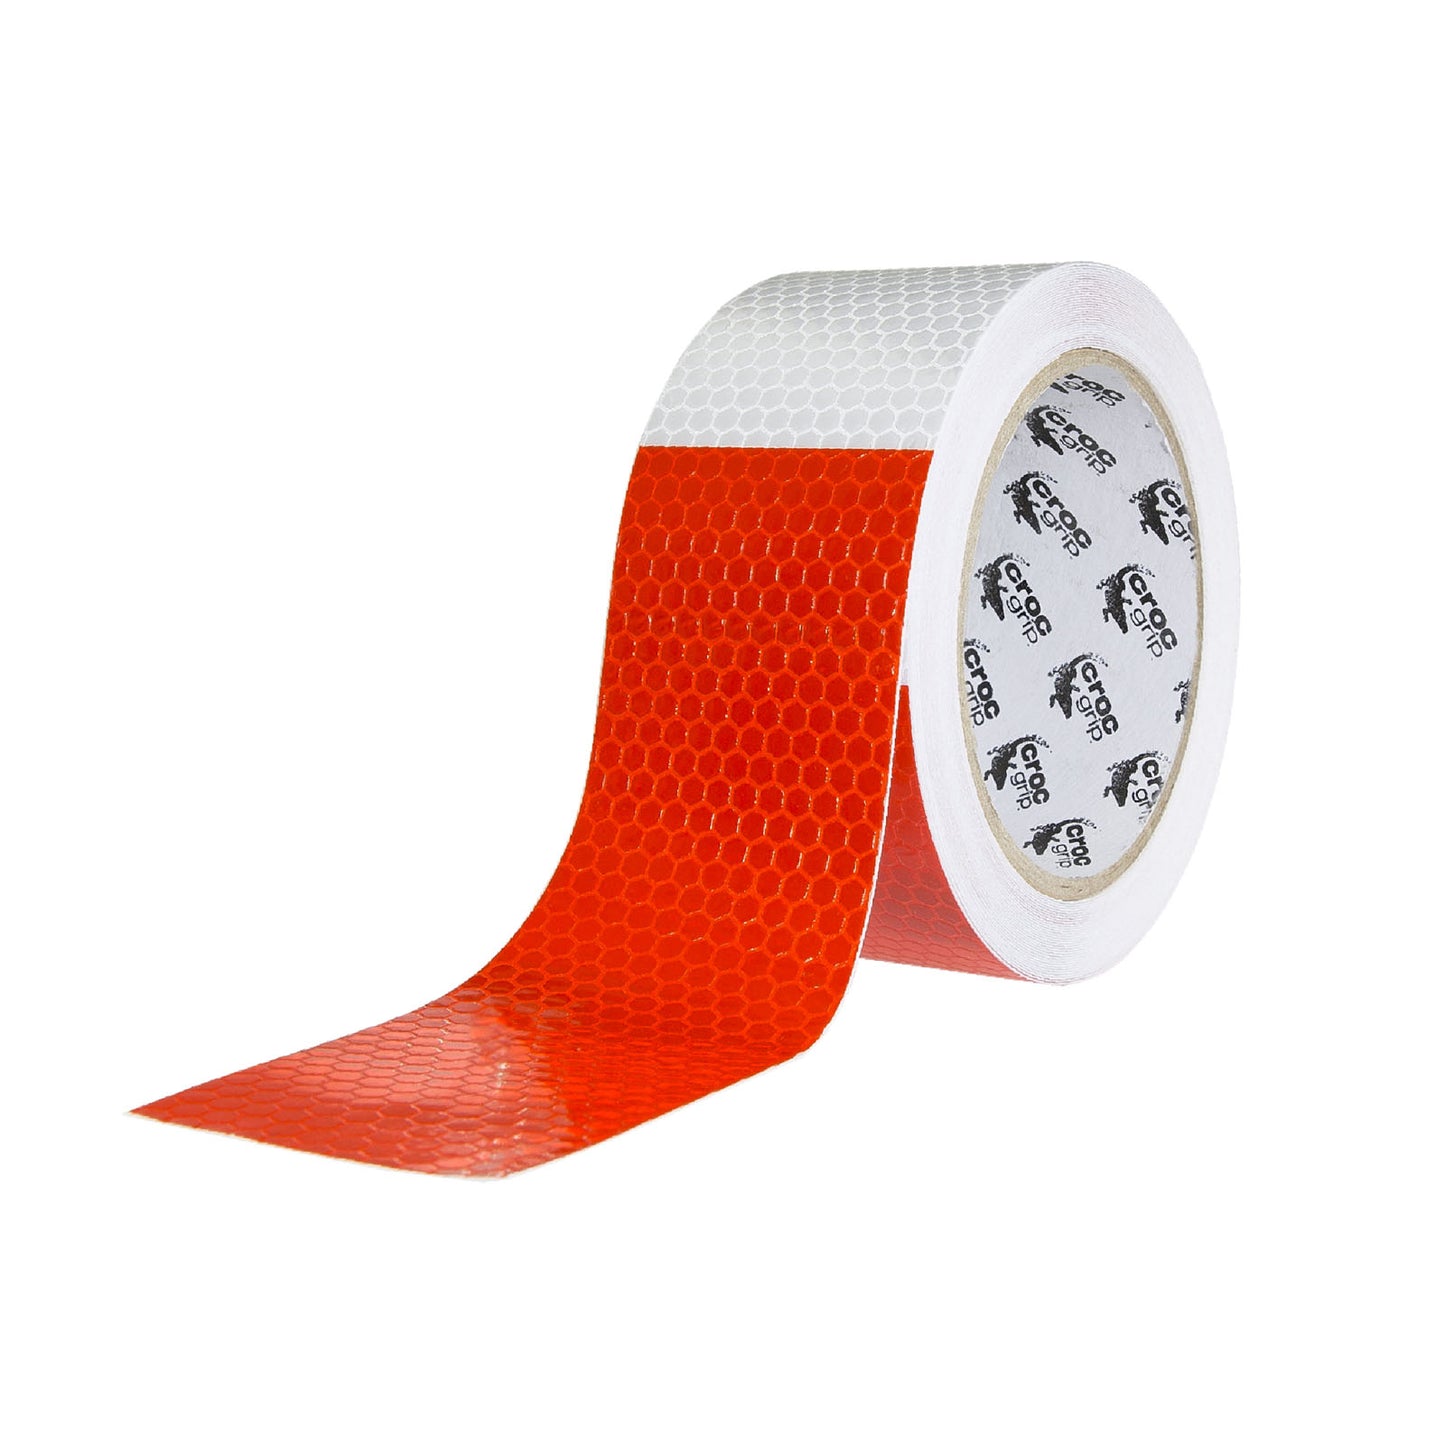 10M x 50MM Red & Silver Reflective Tape